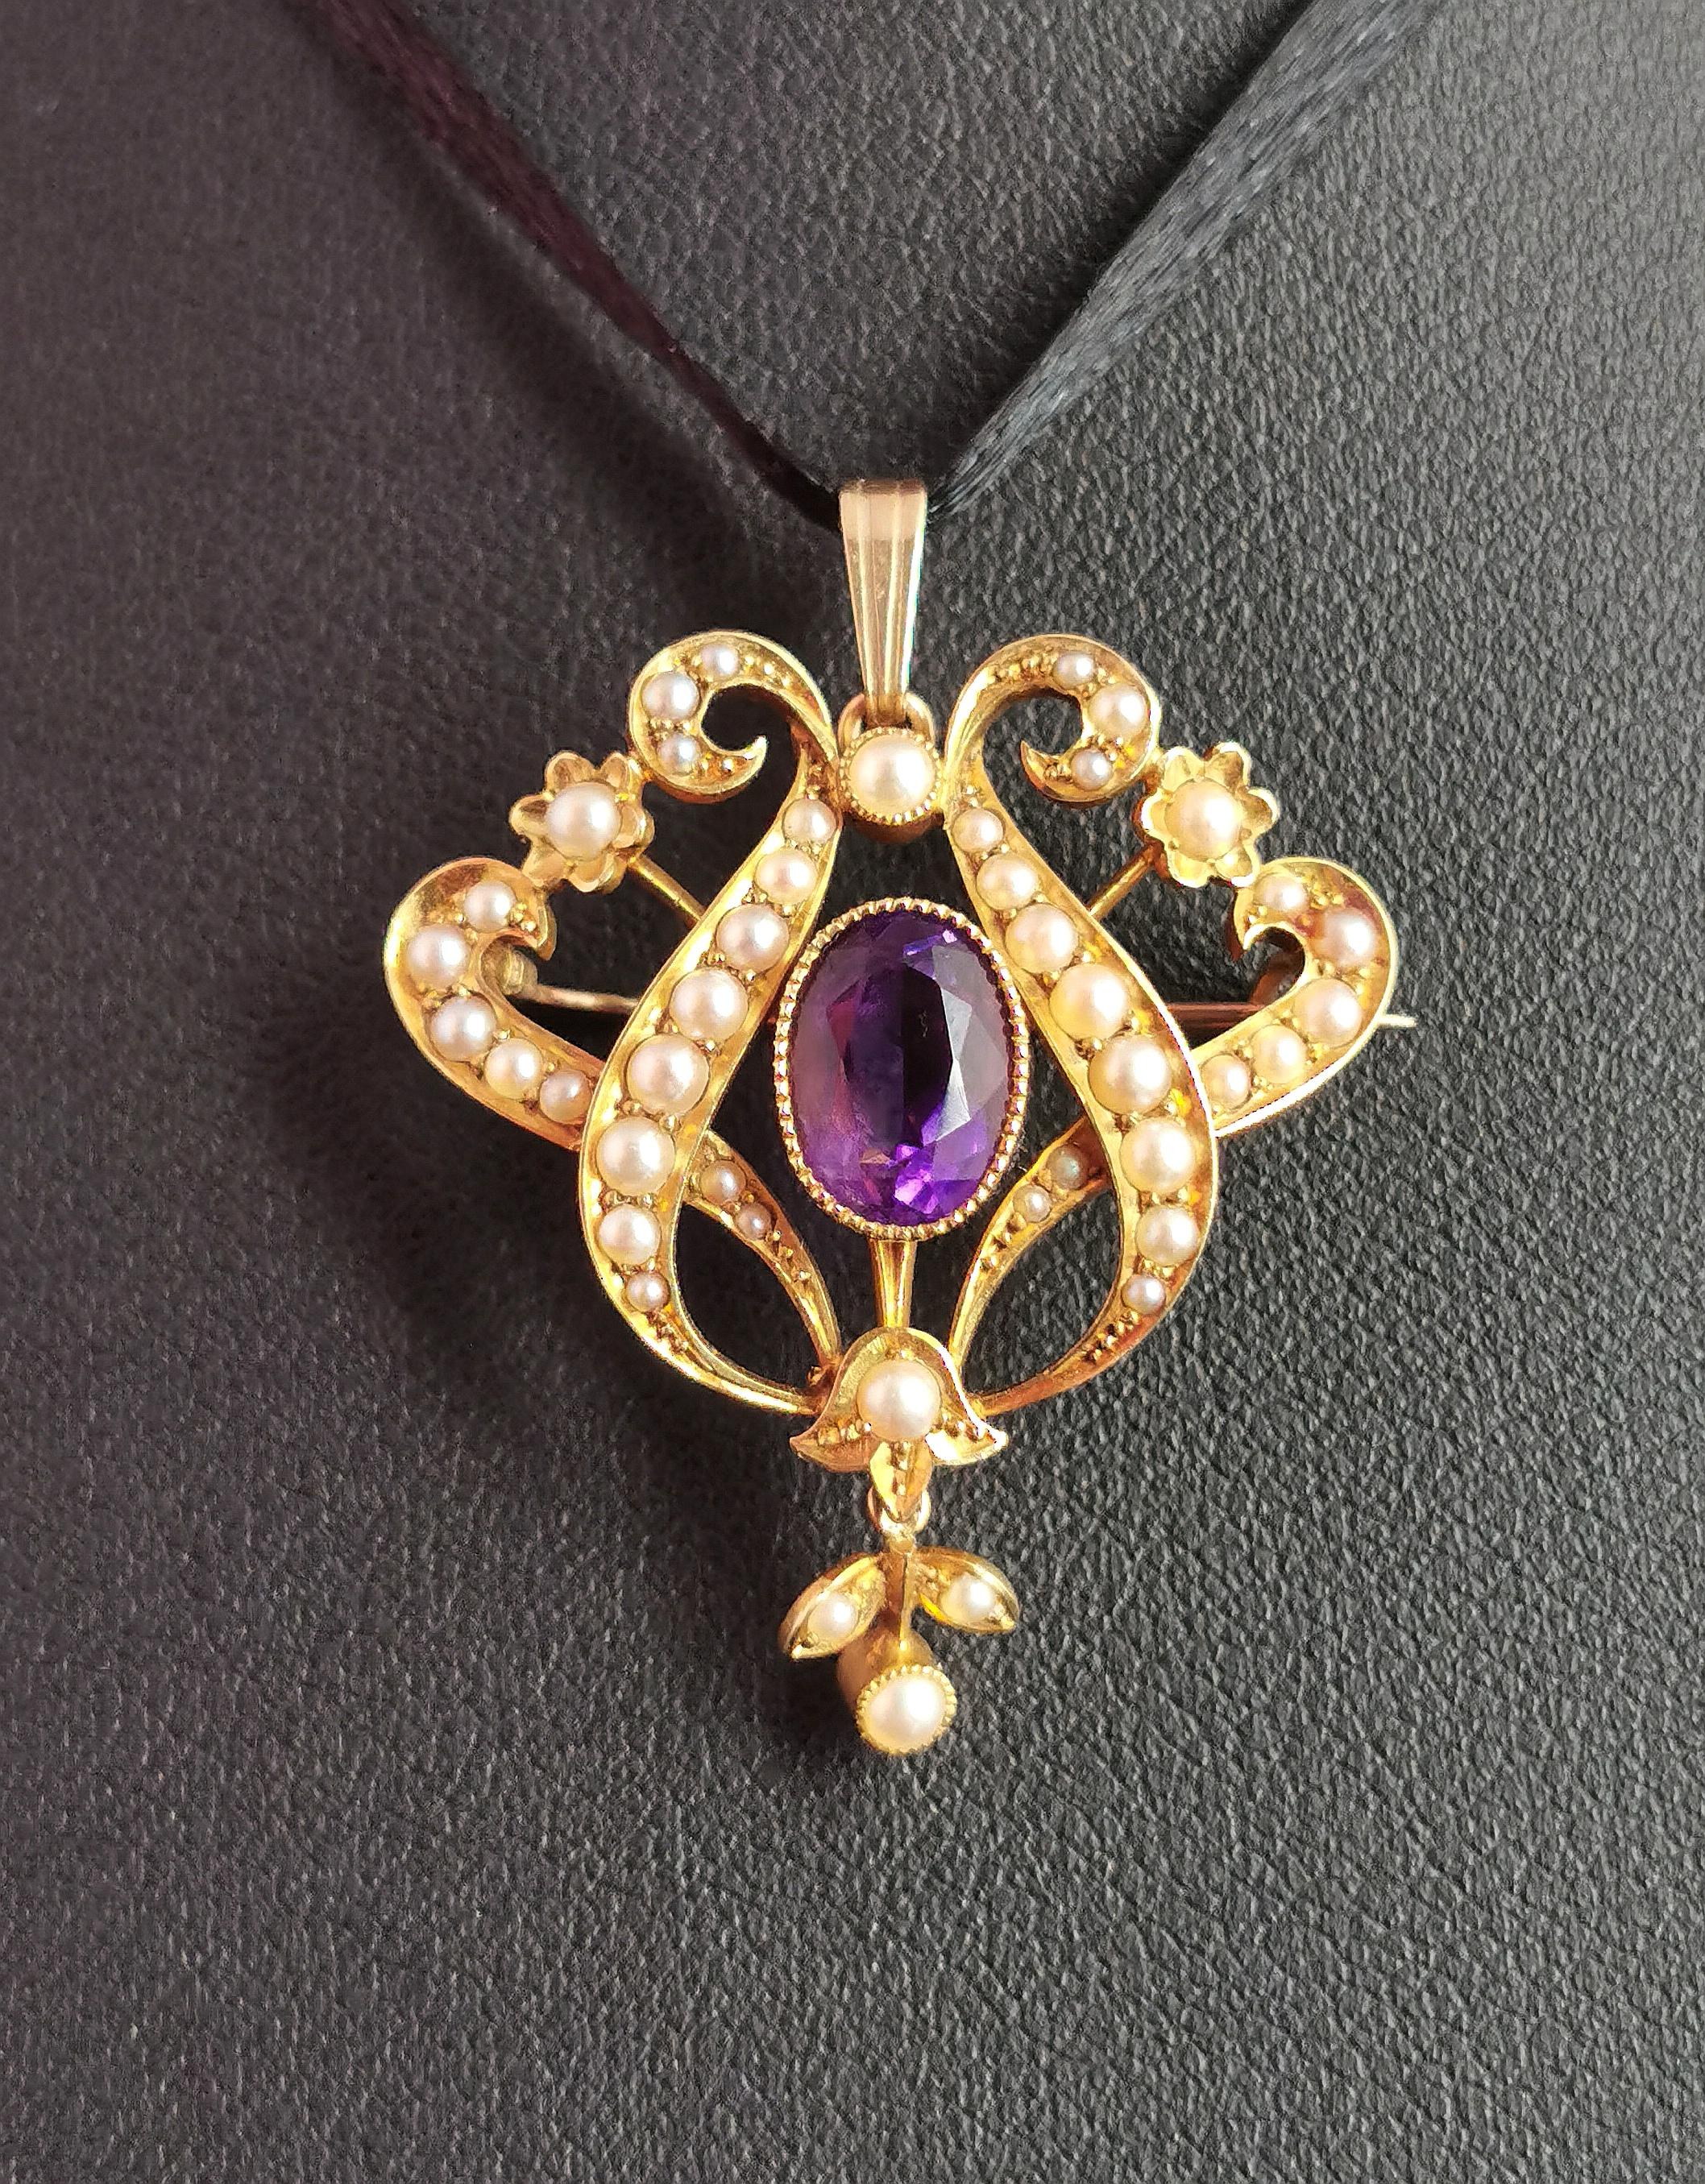 Antique Art Nouveau Amethyst and Pearl Pendant Brooch, 15kt Yellow Gold 5